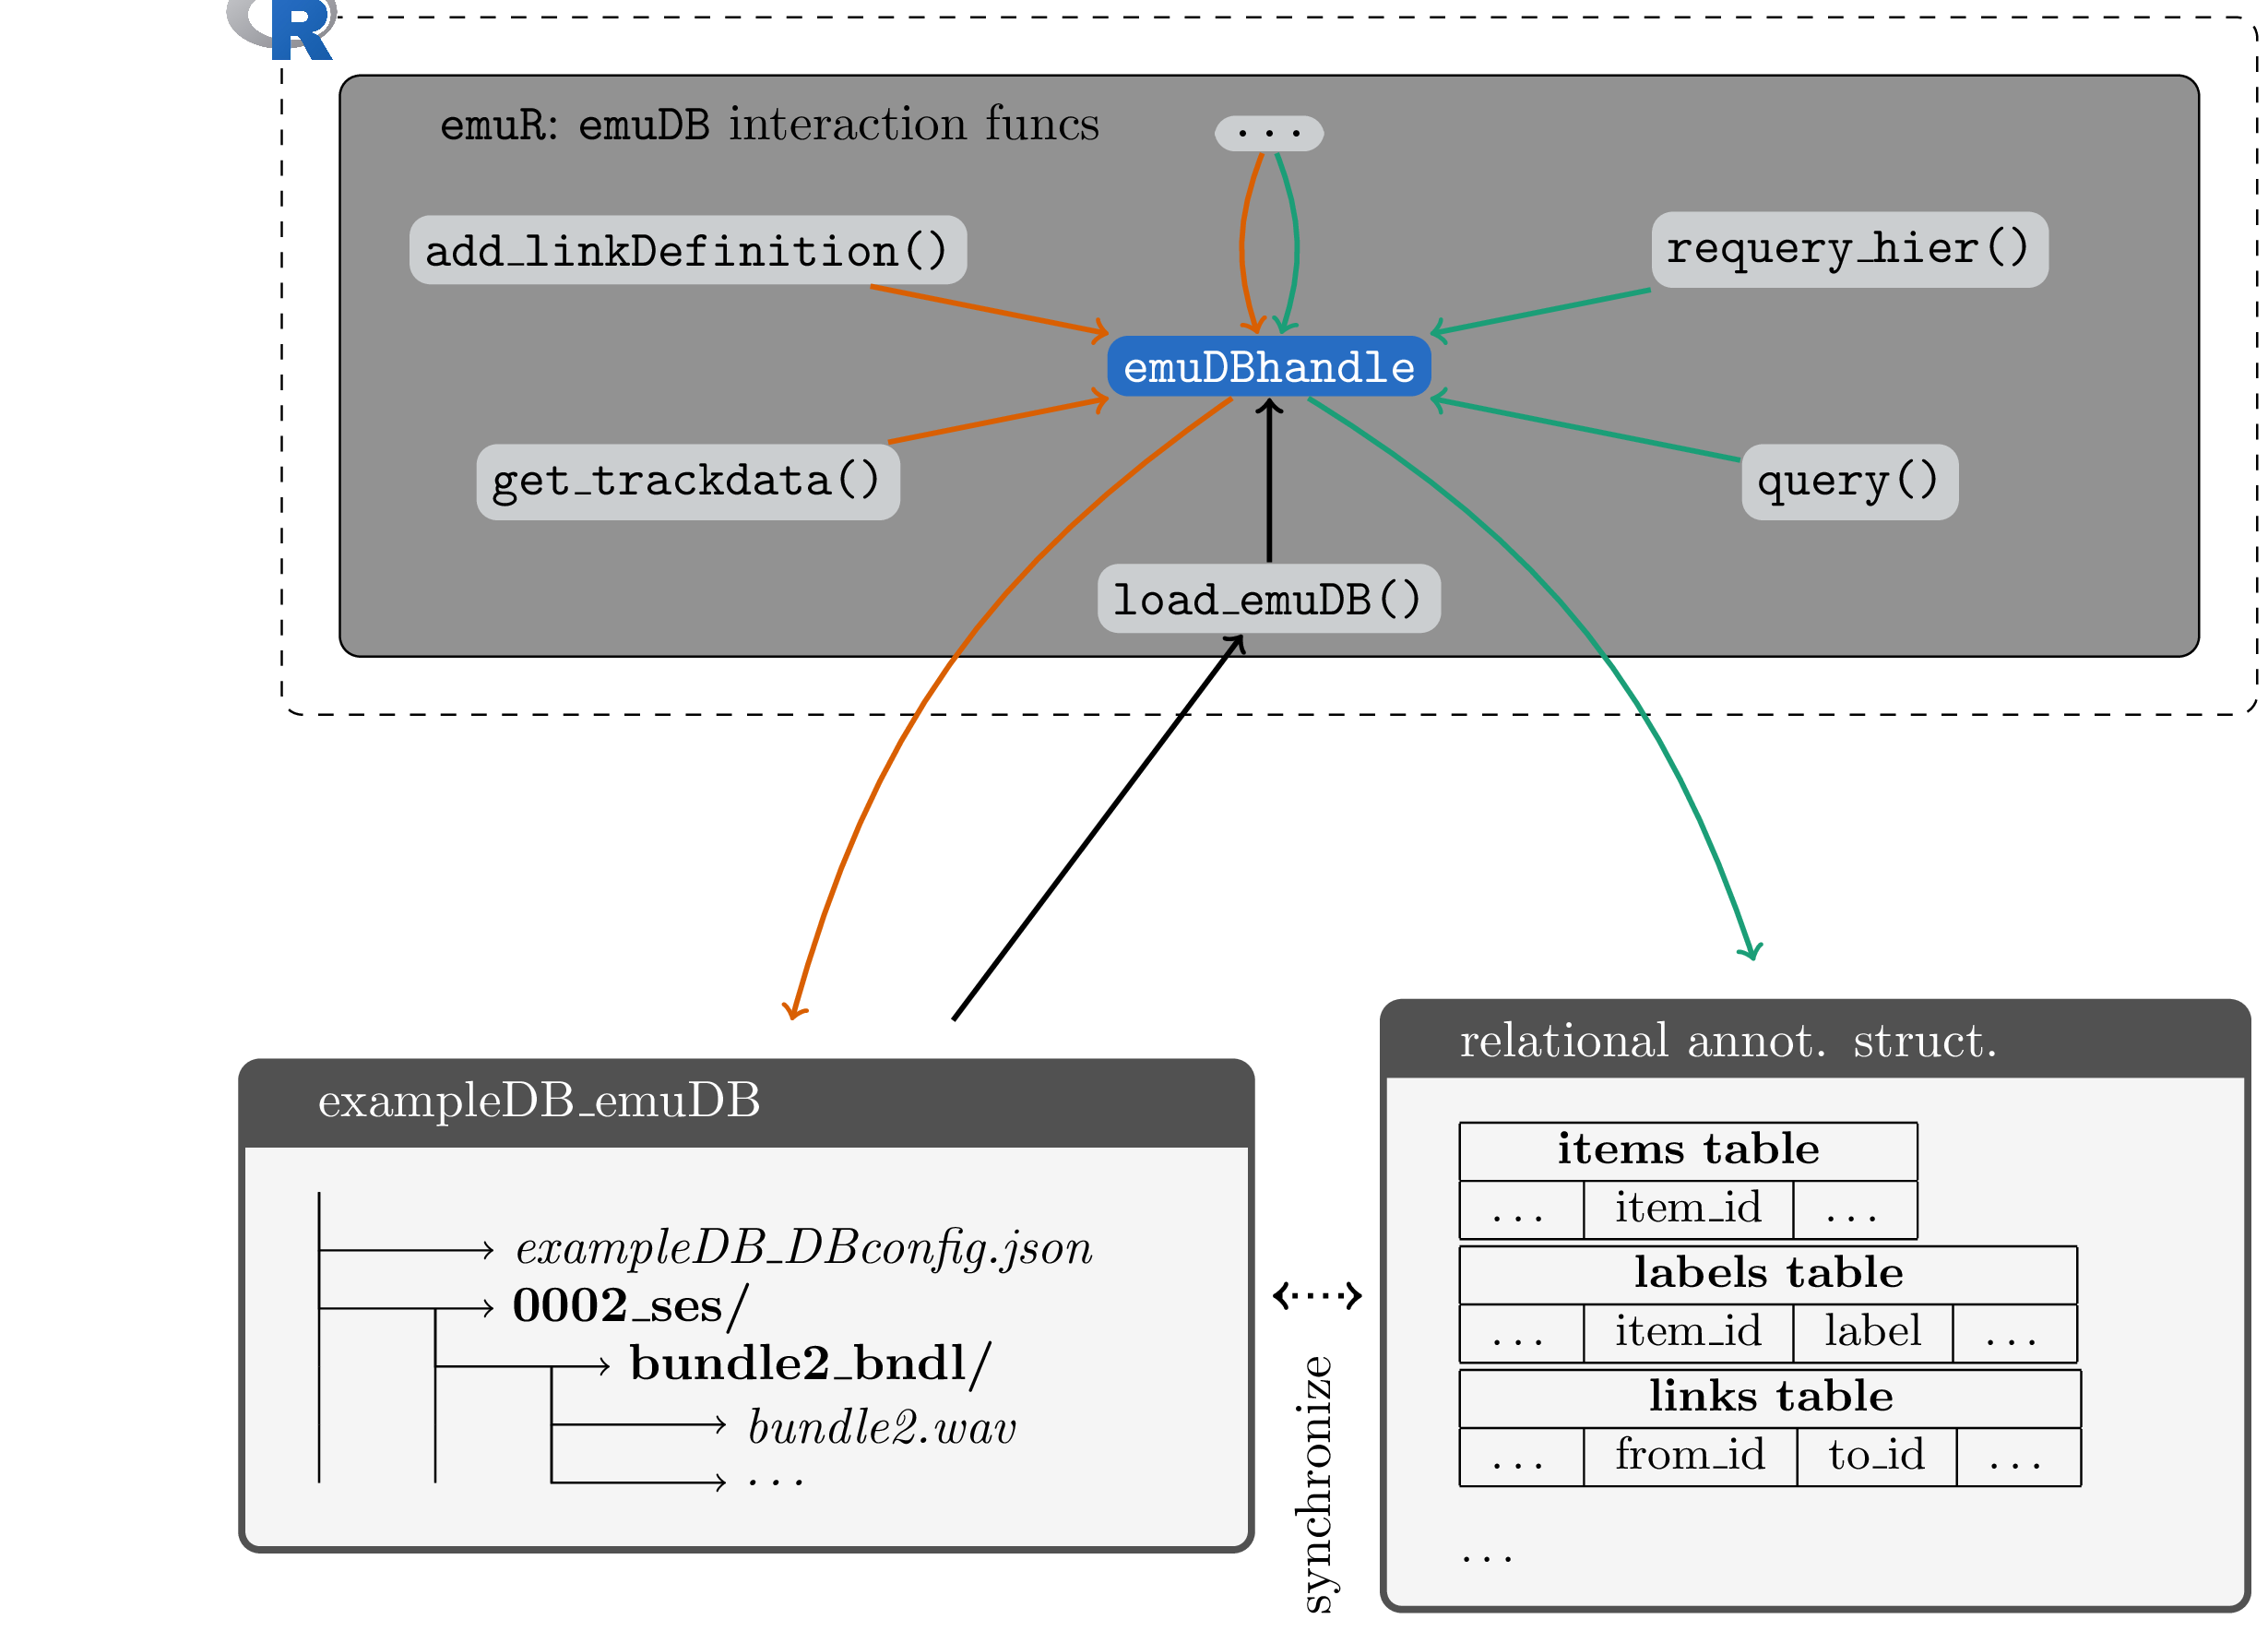 Schematic architecture of `emuDB` interaction functions of the `emuR` package. textcolor{three-color-c2}{Orange} paths show examples of functions interacting with the files of the `emuDB`, while  extcolor{three-color-c1}{green} paths show functions accessing the relational annotation structure. Actions like saving a changed annotation using the `EMU-webApp` first save the `_annot.json` to disk then update the relational annotation structure.